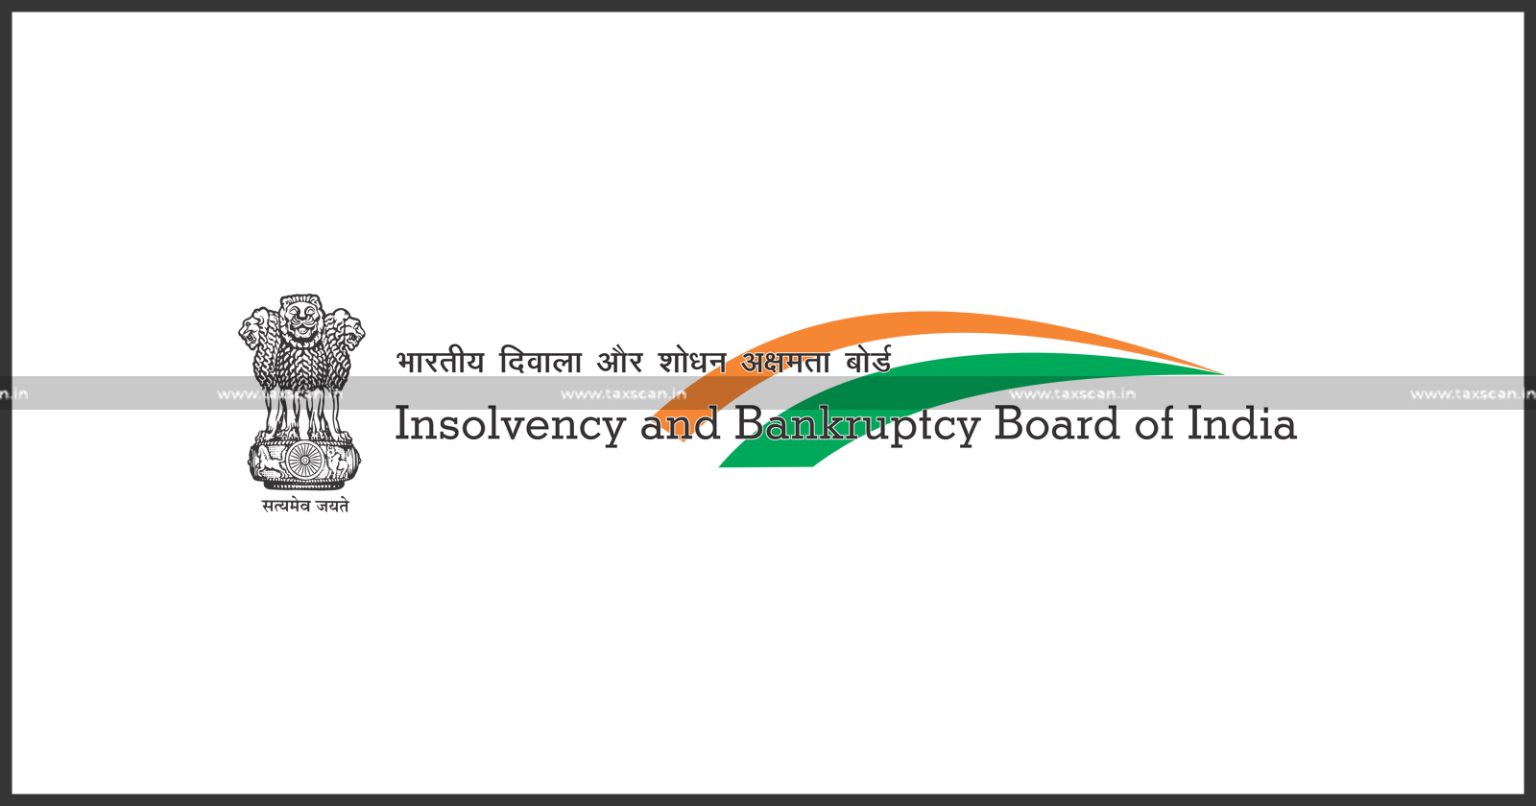 IBBI - Insolvency Application - Declaration requirements - Registered insolvency professionals - Form C Declaration - Creditor - TAXSCAN